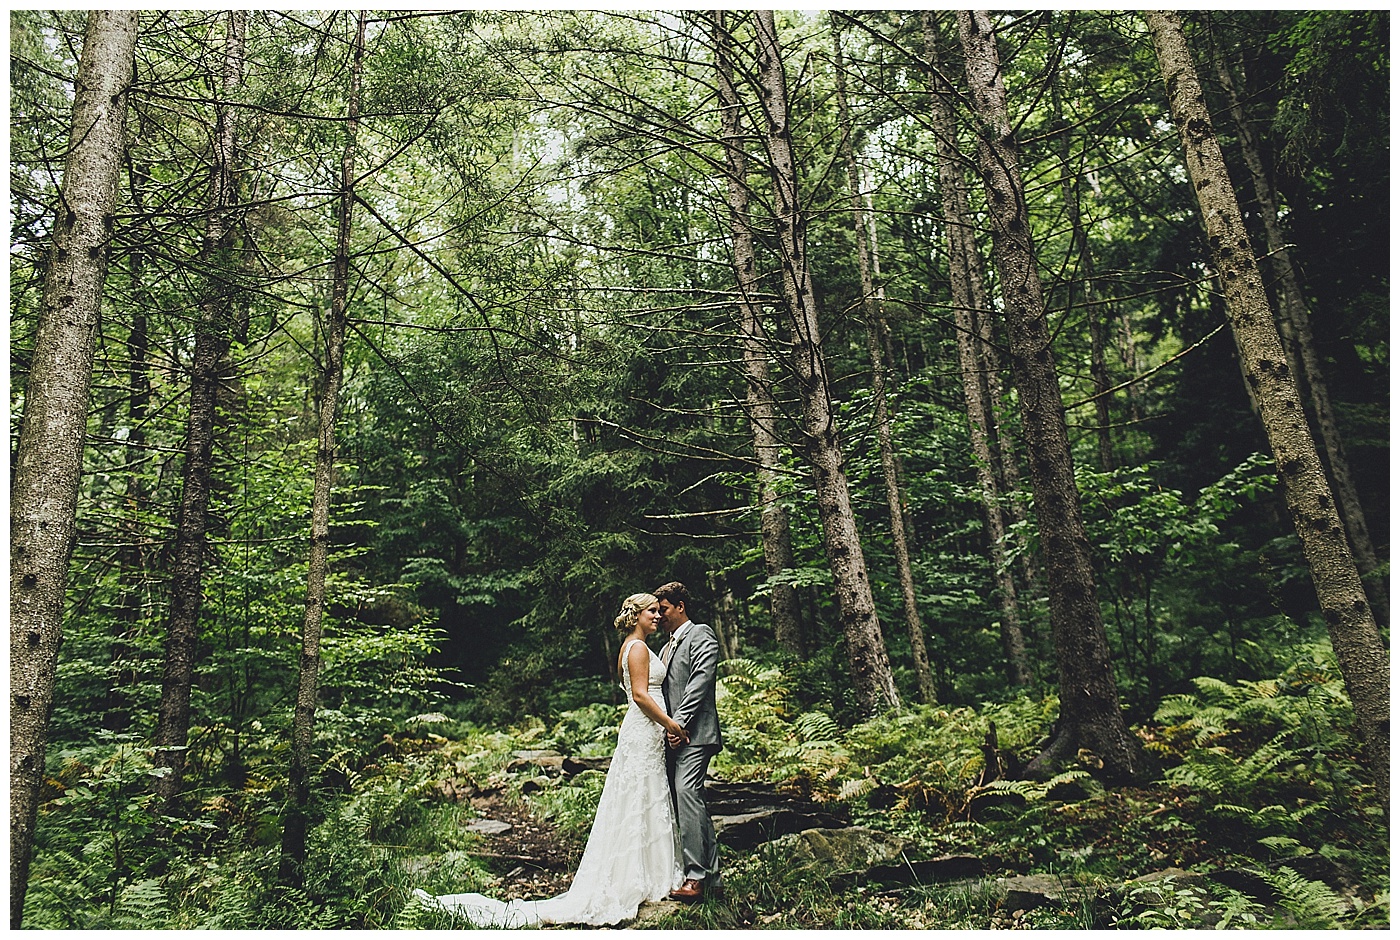 Gorgeous, Unique, Wedding Photo in the Vermont Woods at Riverside Farm.